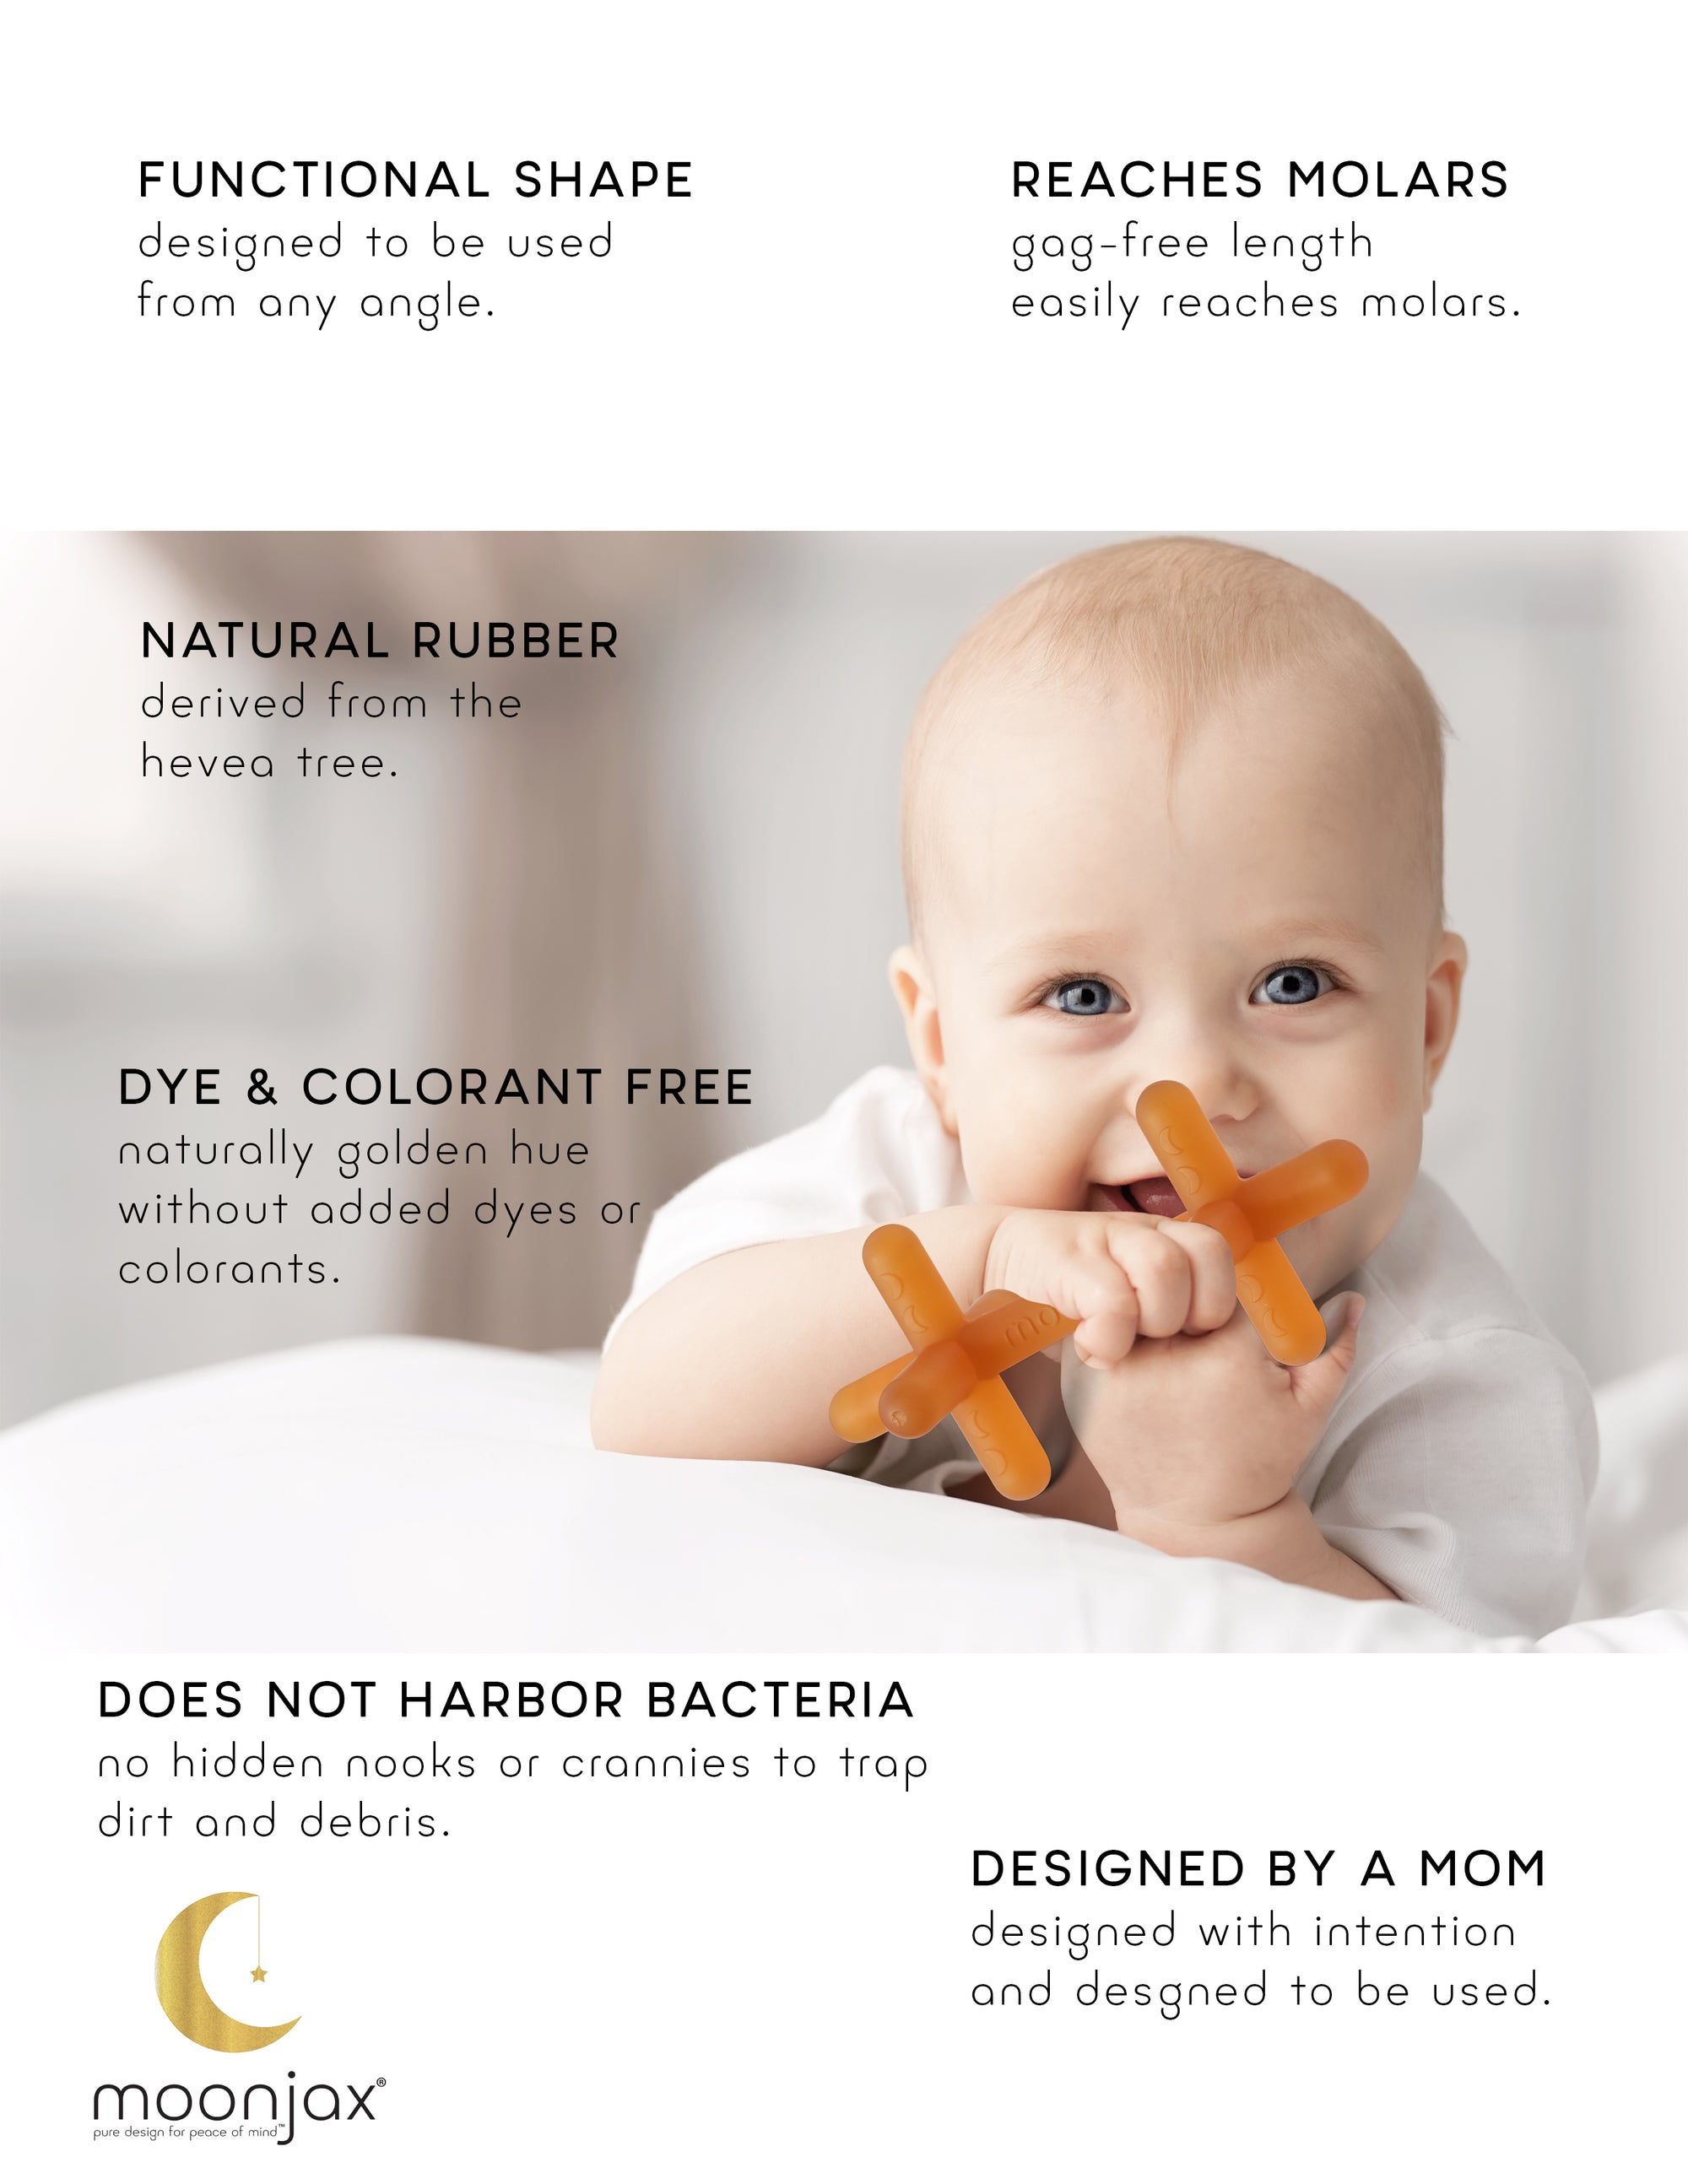 The best baby teether: 1-pack natural hevea tree rubber teether